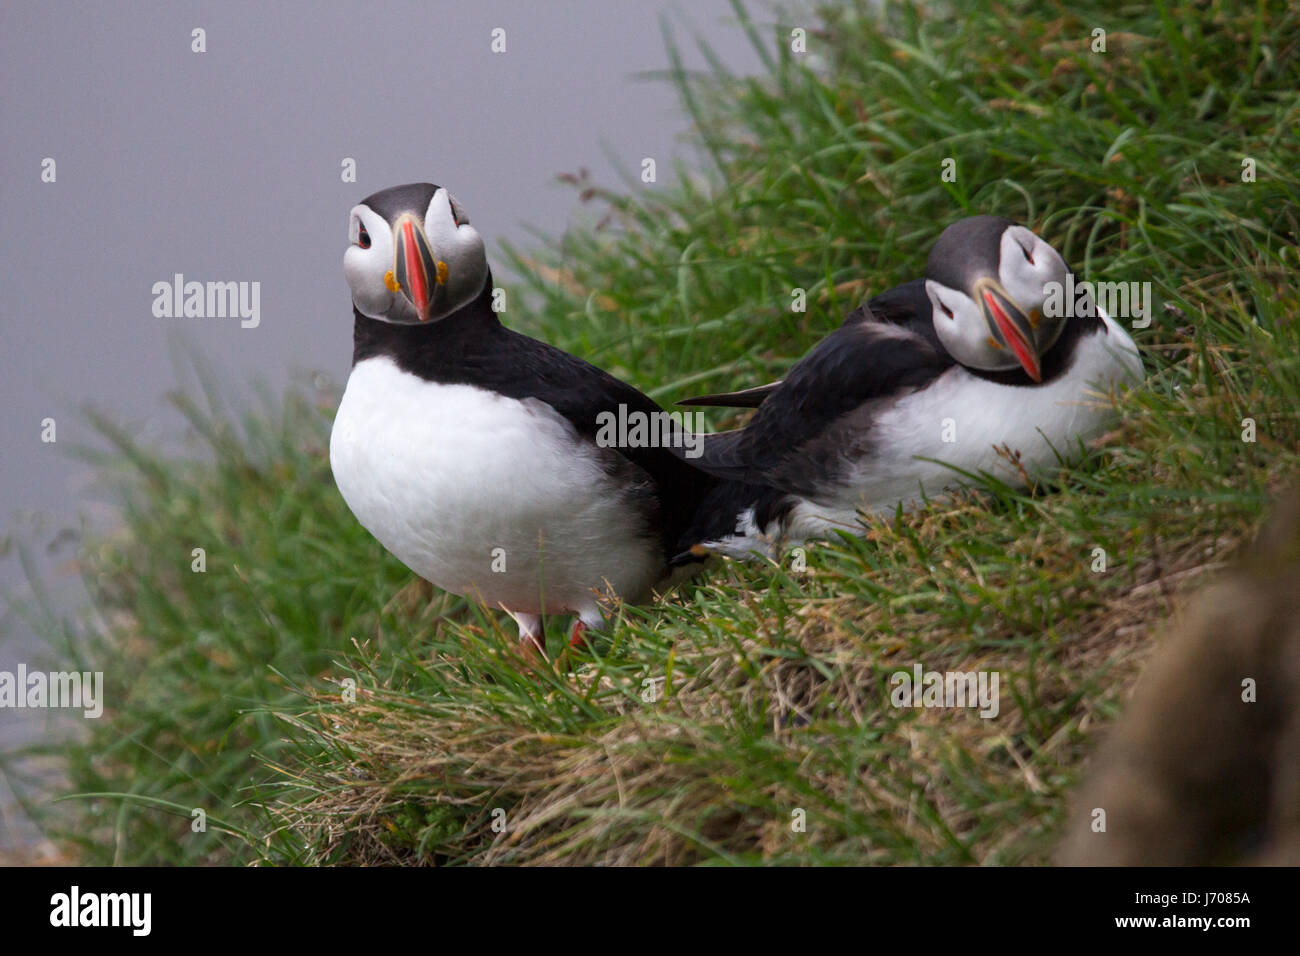 Atlantic puffin or common puffin in Iceland Stock Photo